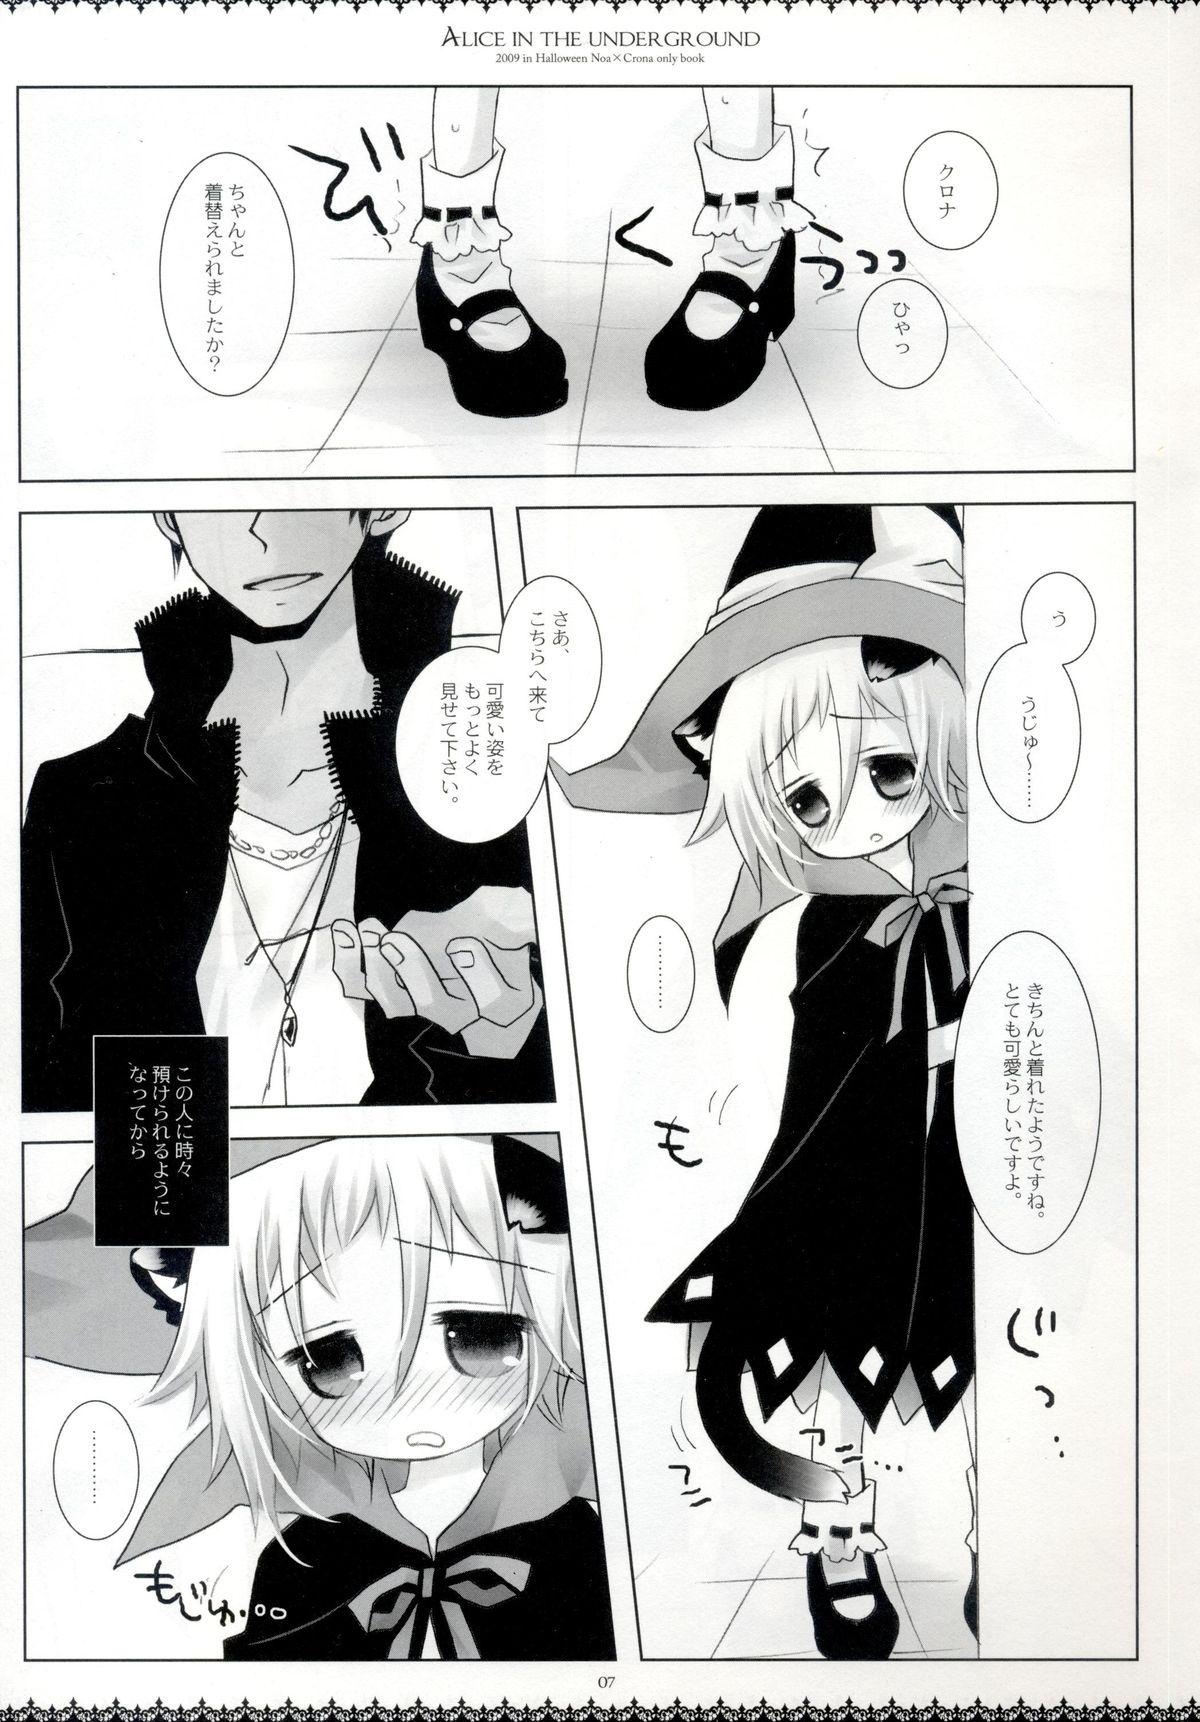 Free Rough Sex Alice in the underground - Soul eater African - Page 6